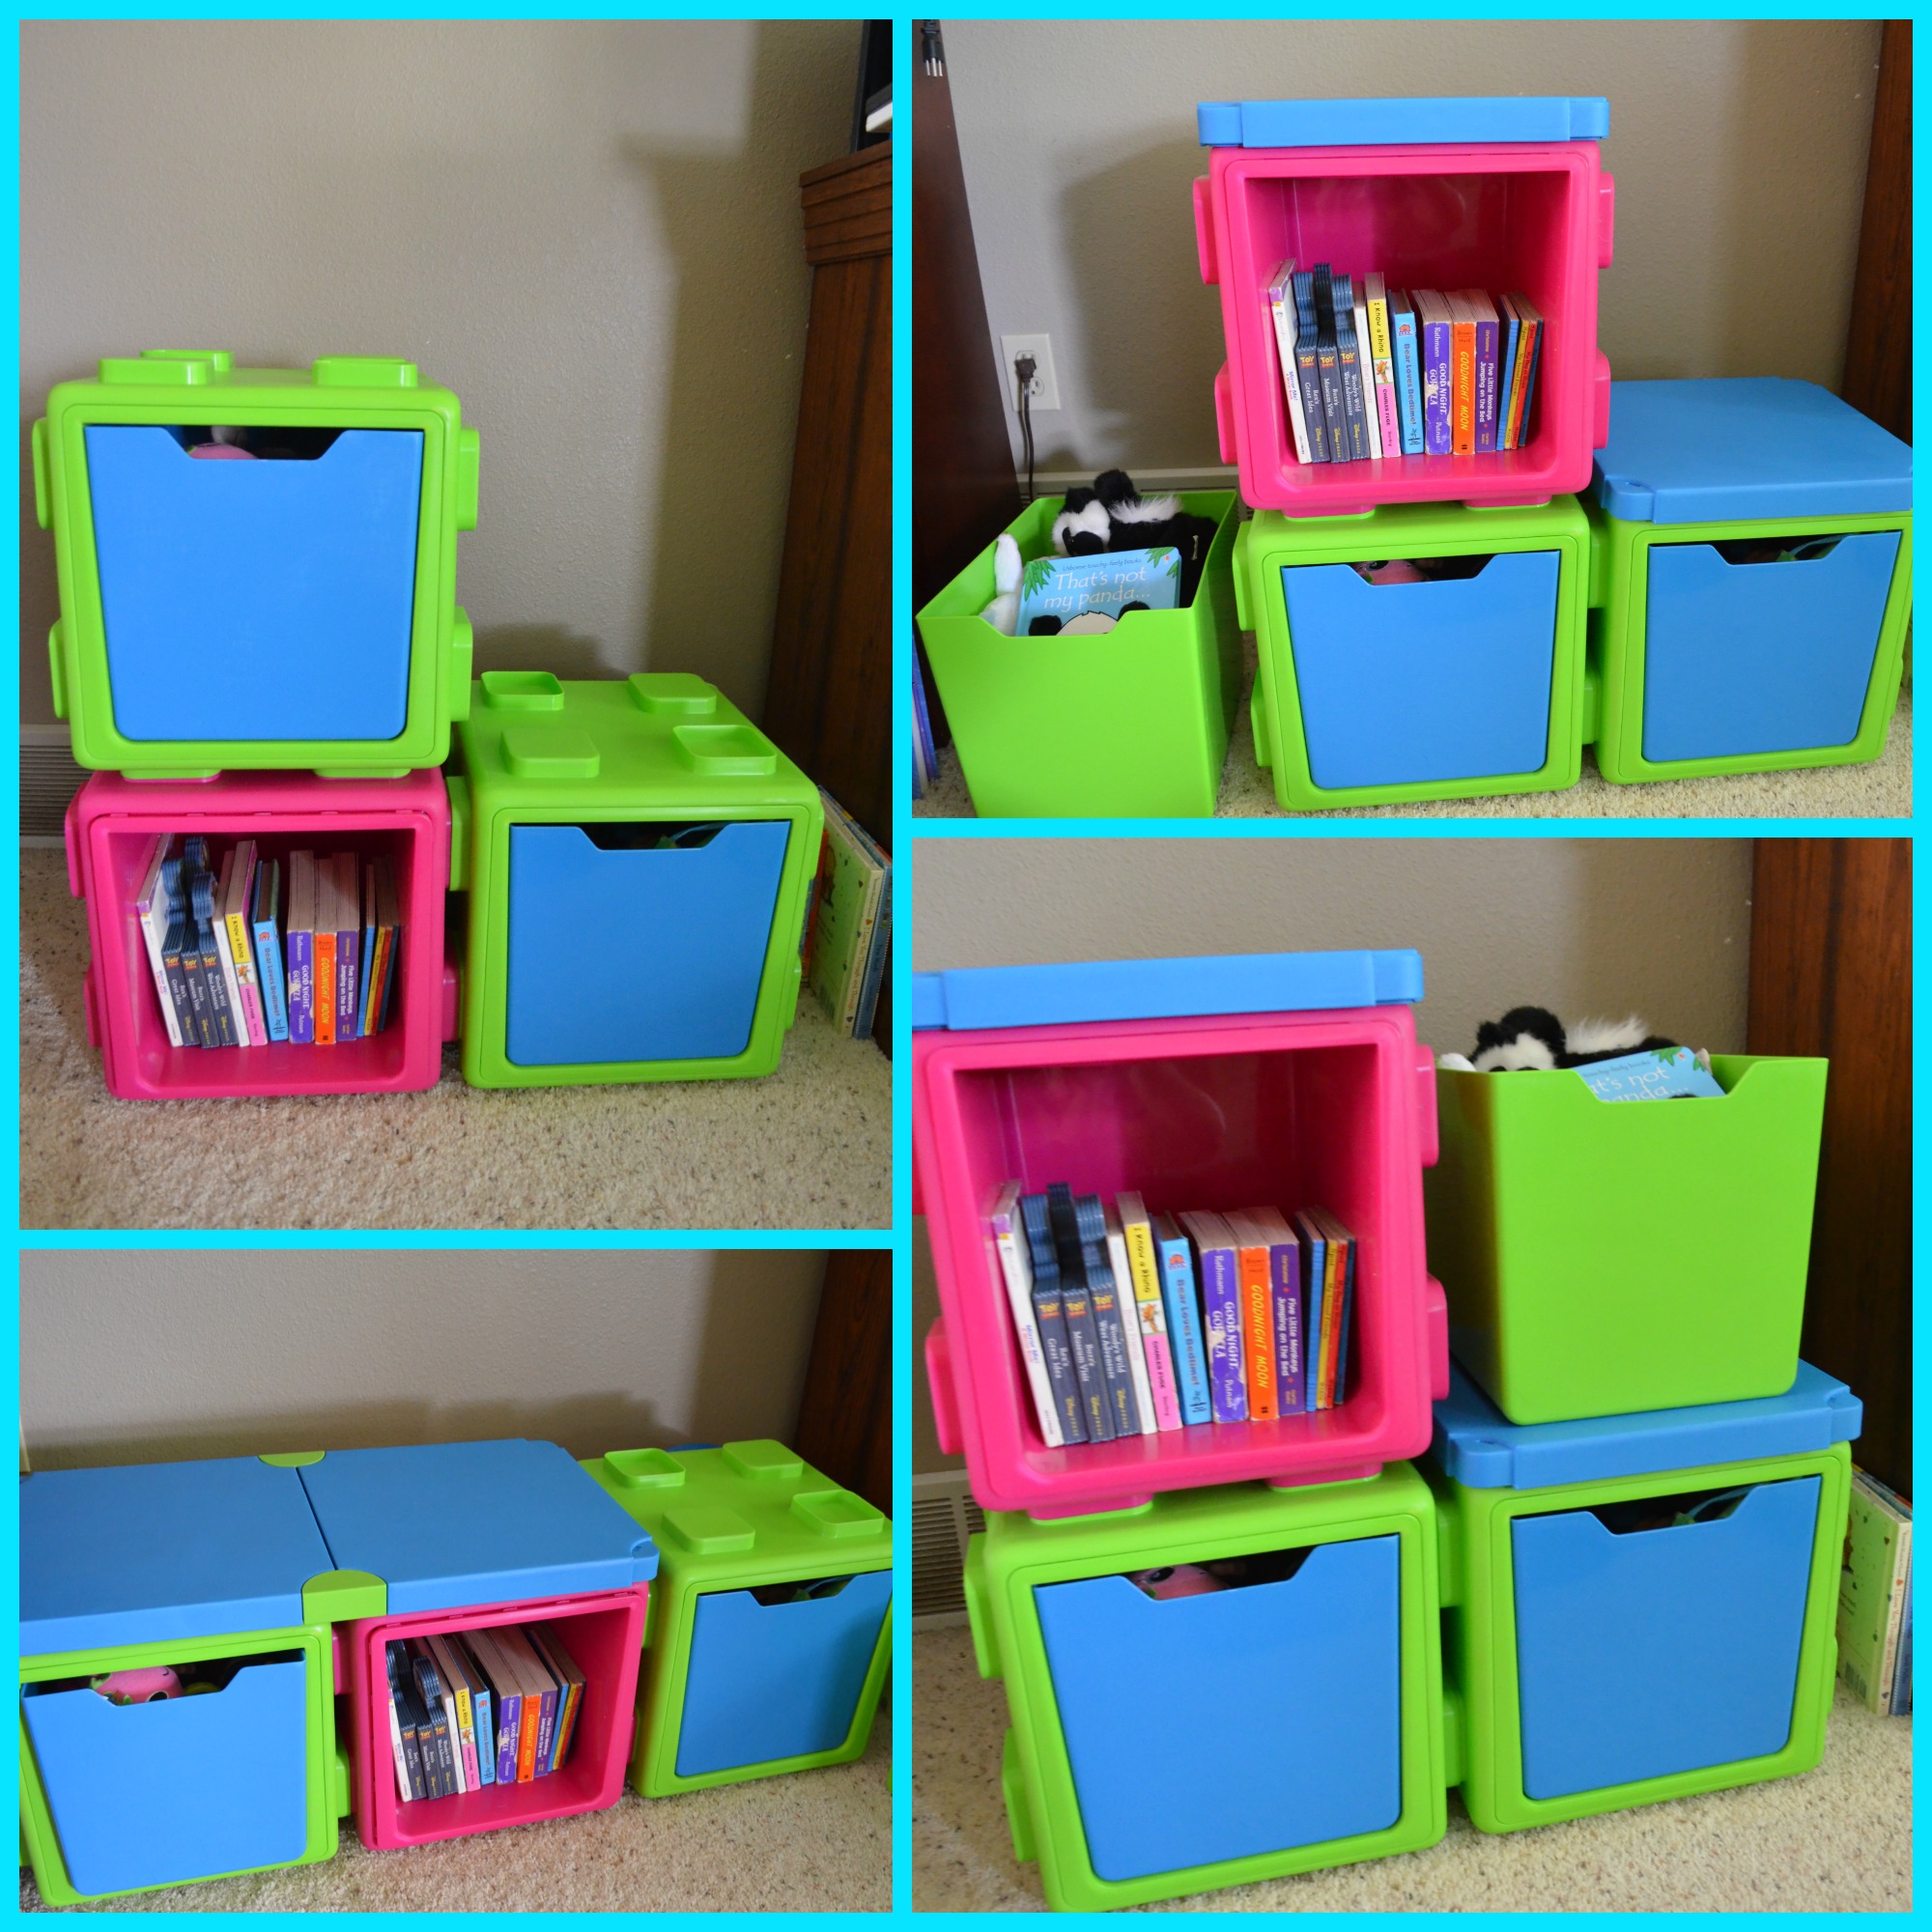 Chillafish BOX Storage for Kids Review